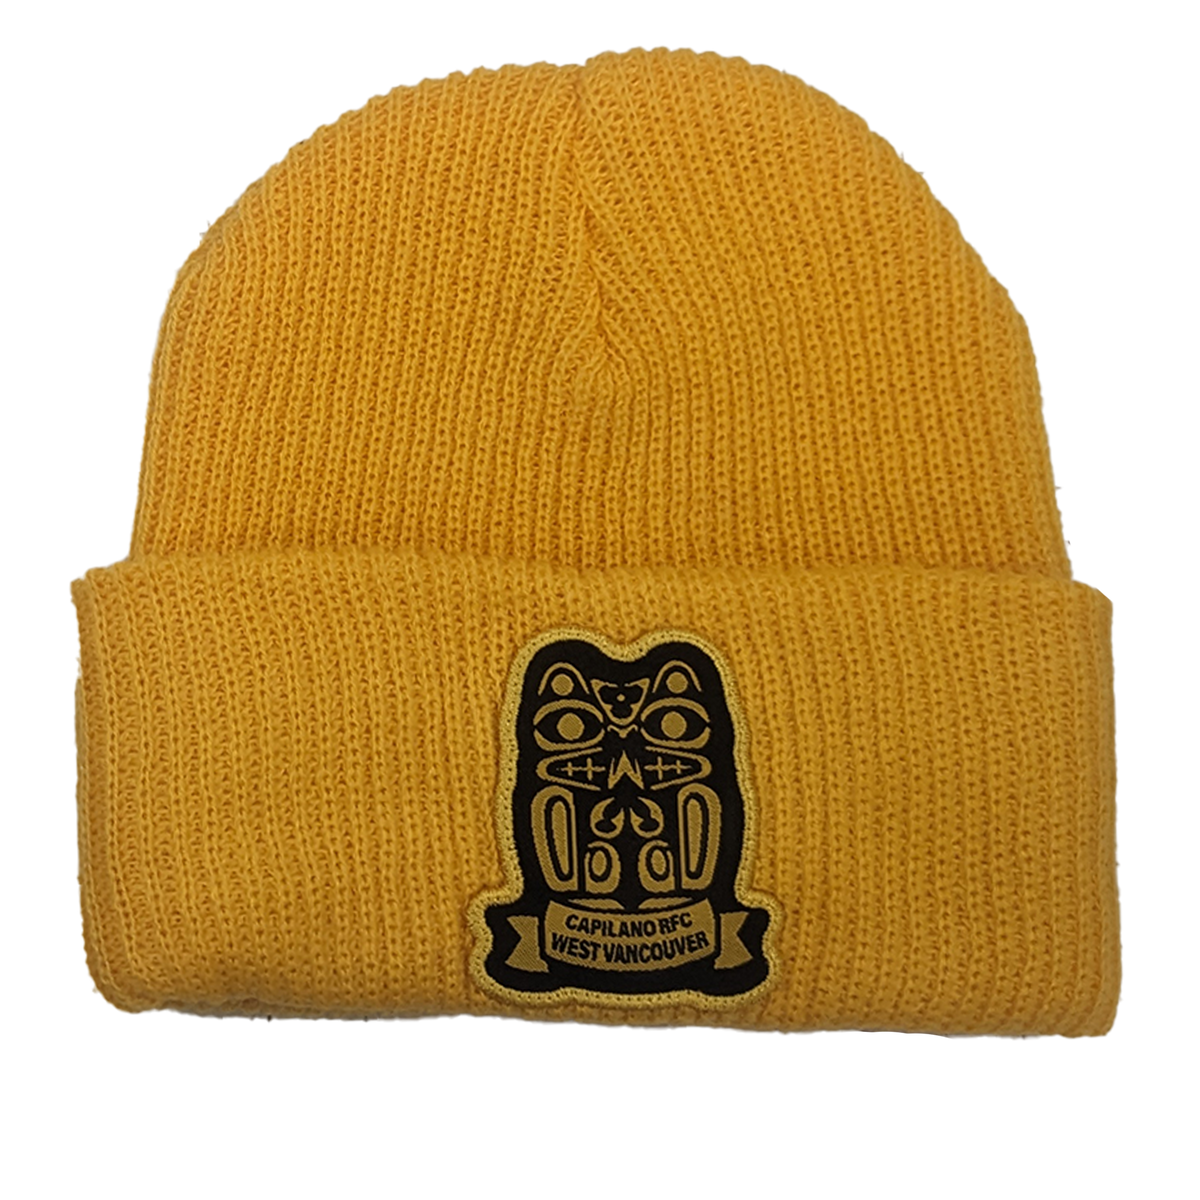 Capilano RFC Folded Slouch Beanie - Adult Unisex One Size Fits All - Gold